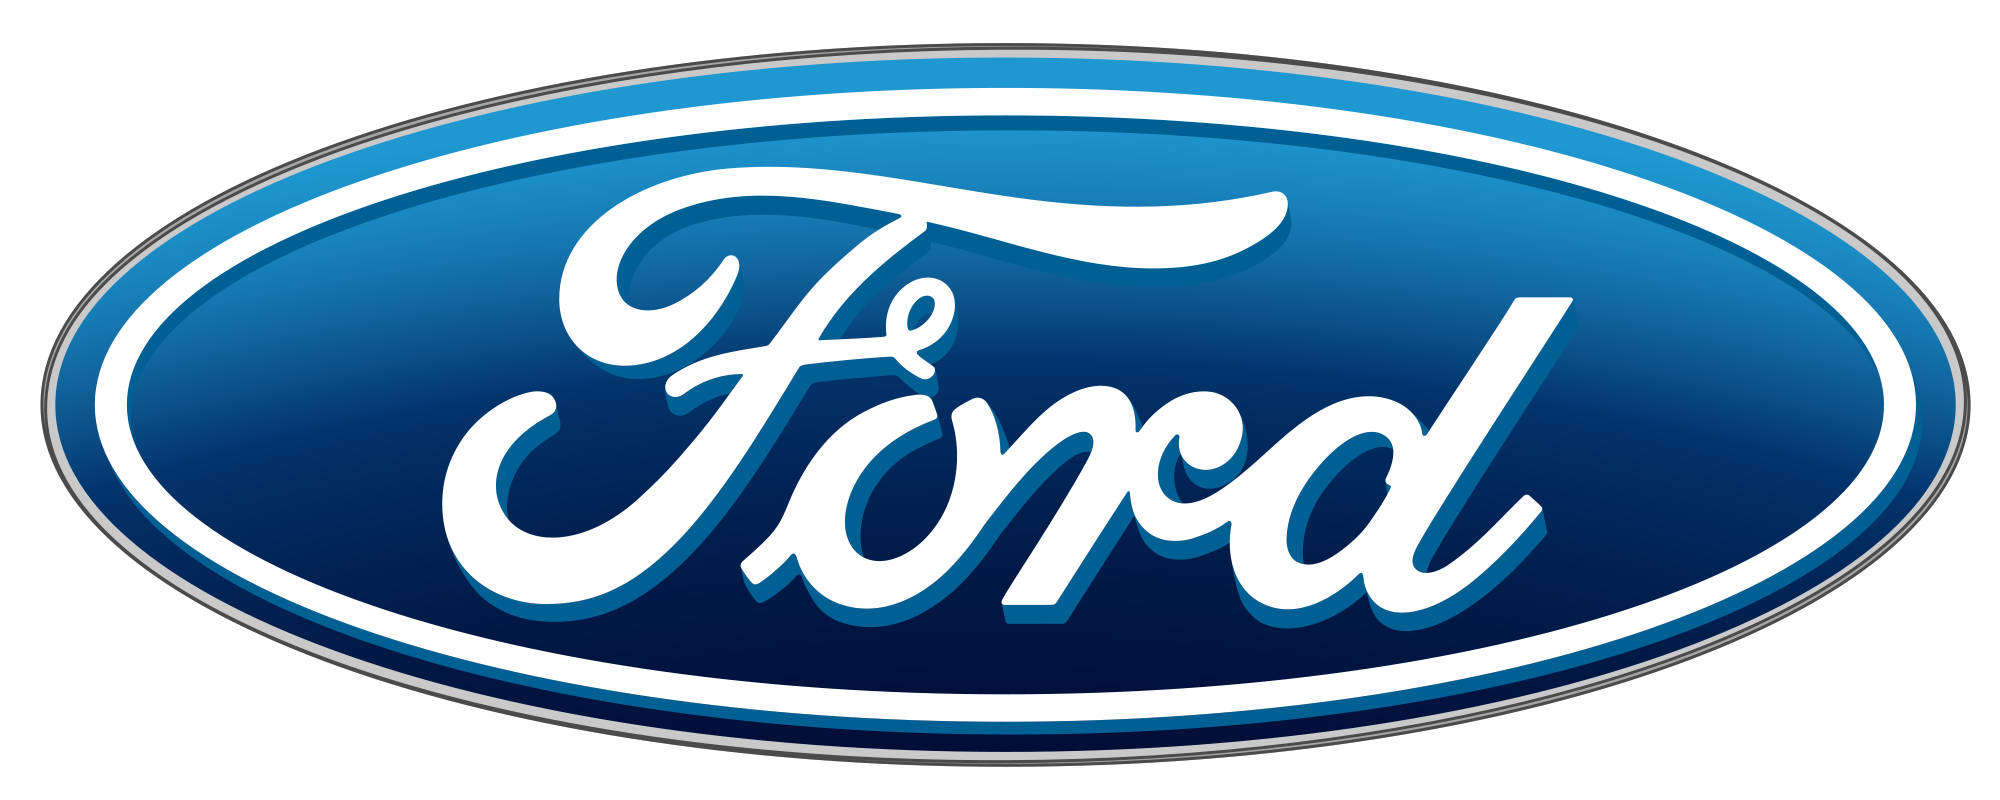 The Ford Family Dominate Its Board Of Directors - Seeking Alpha